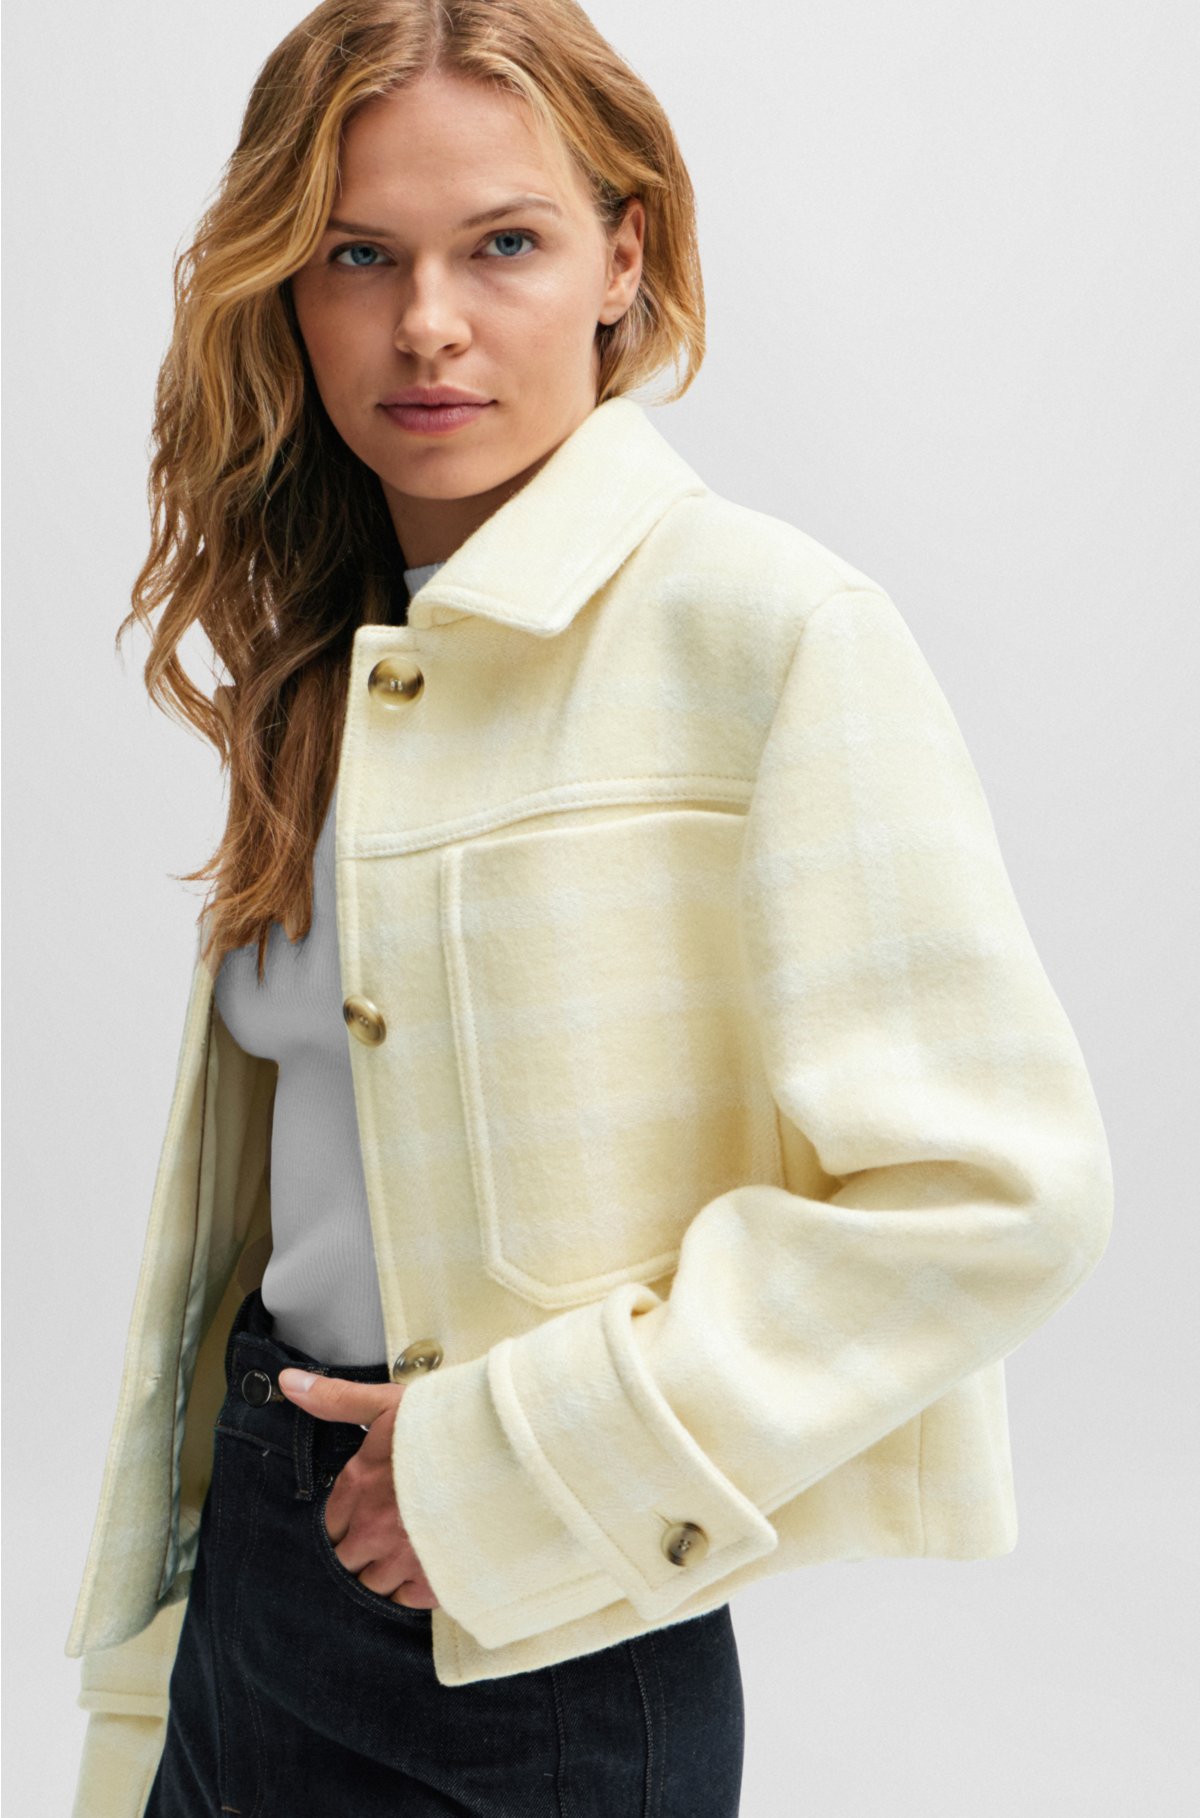 Relaxed-fit jacket in Italian checked cloth, Light Yellow